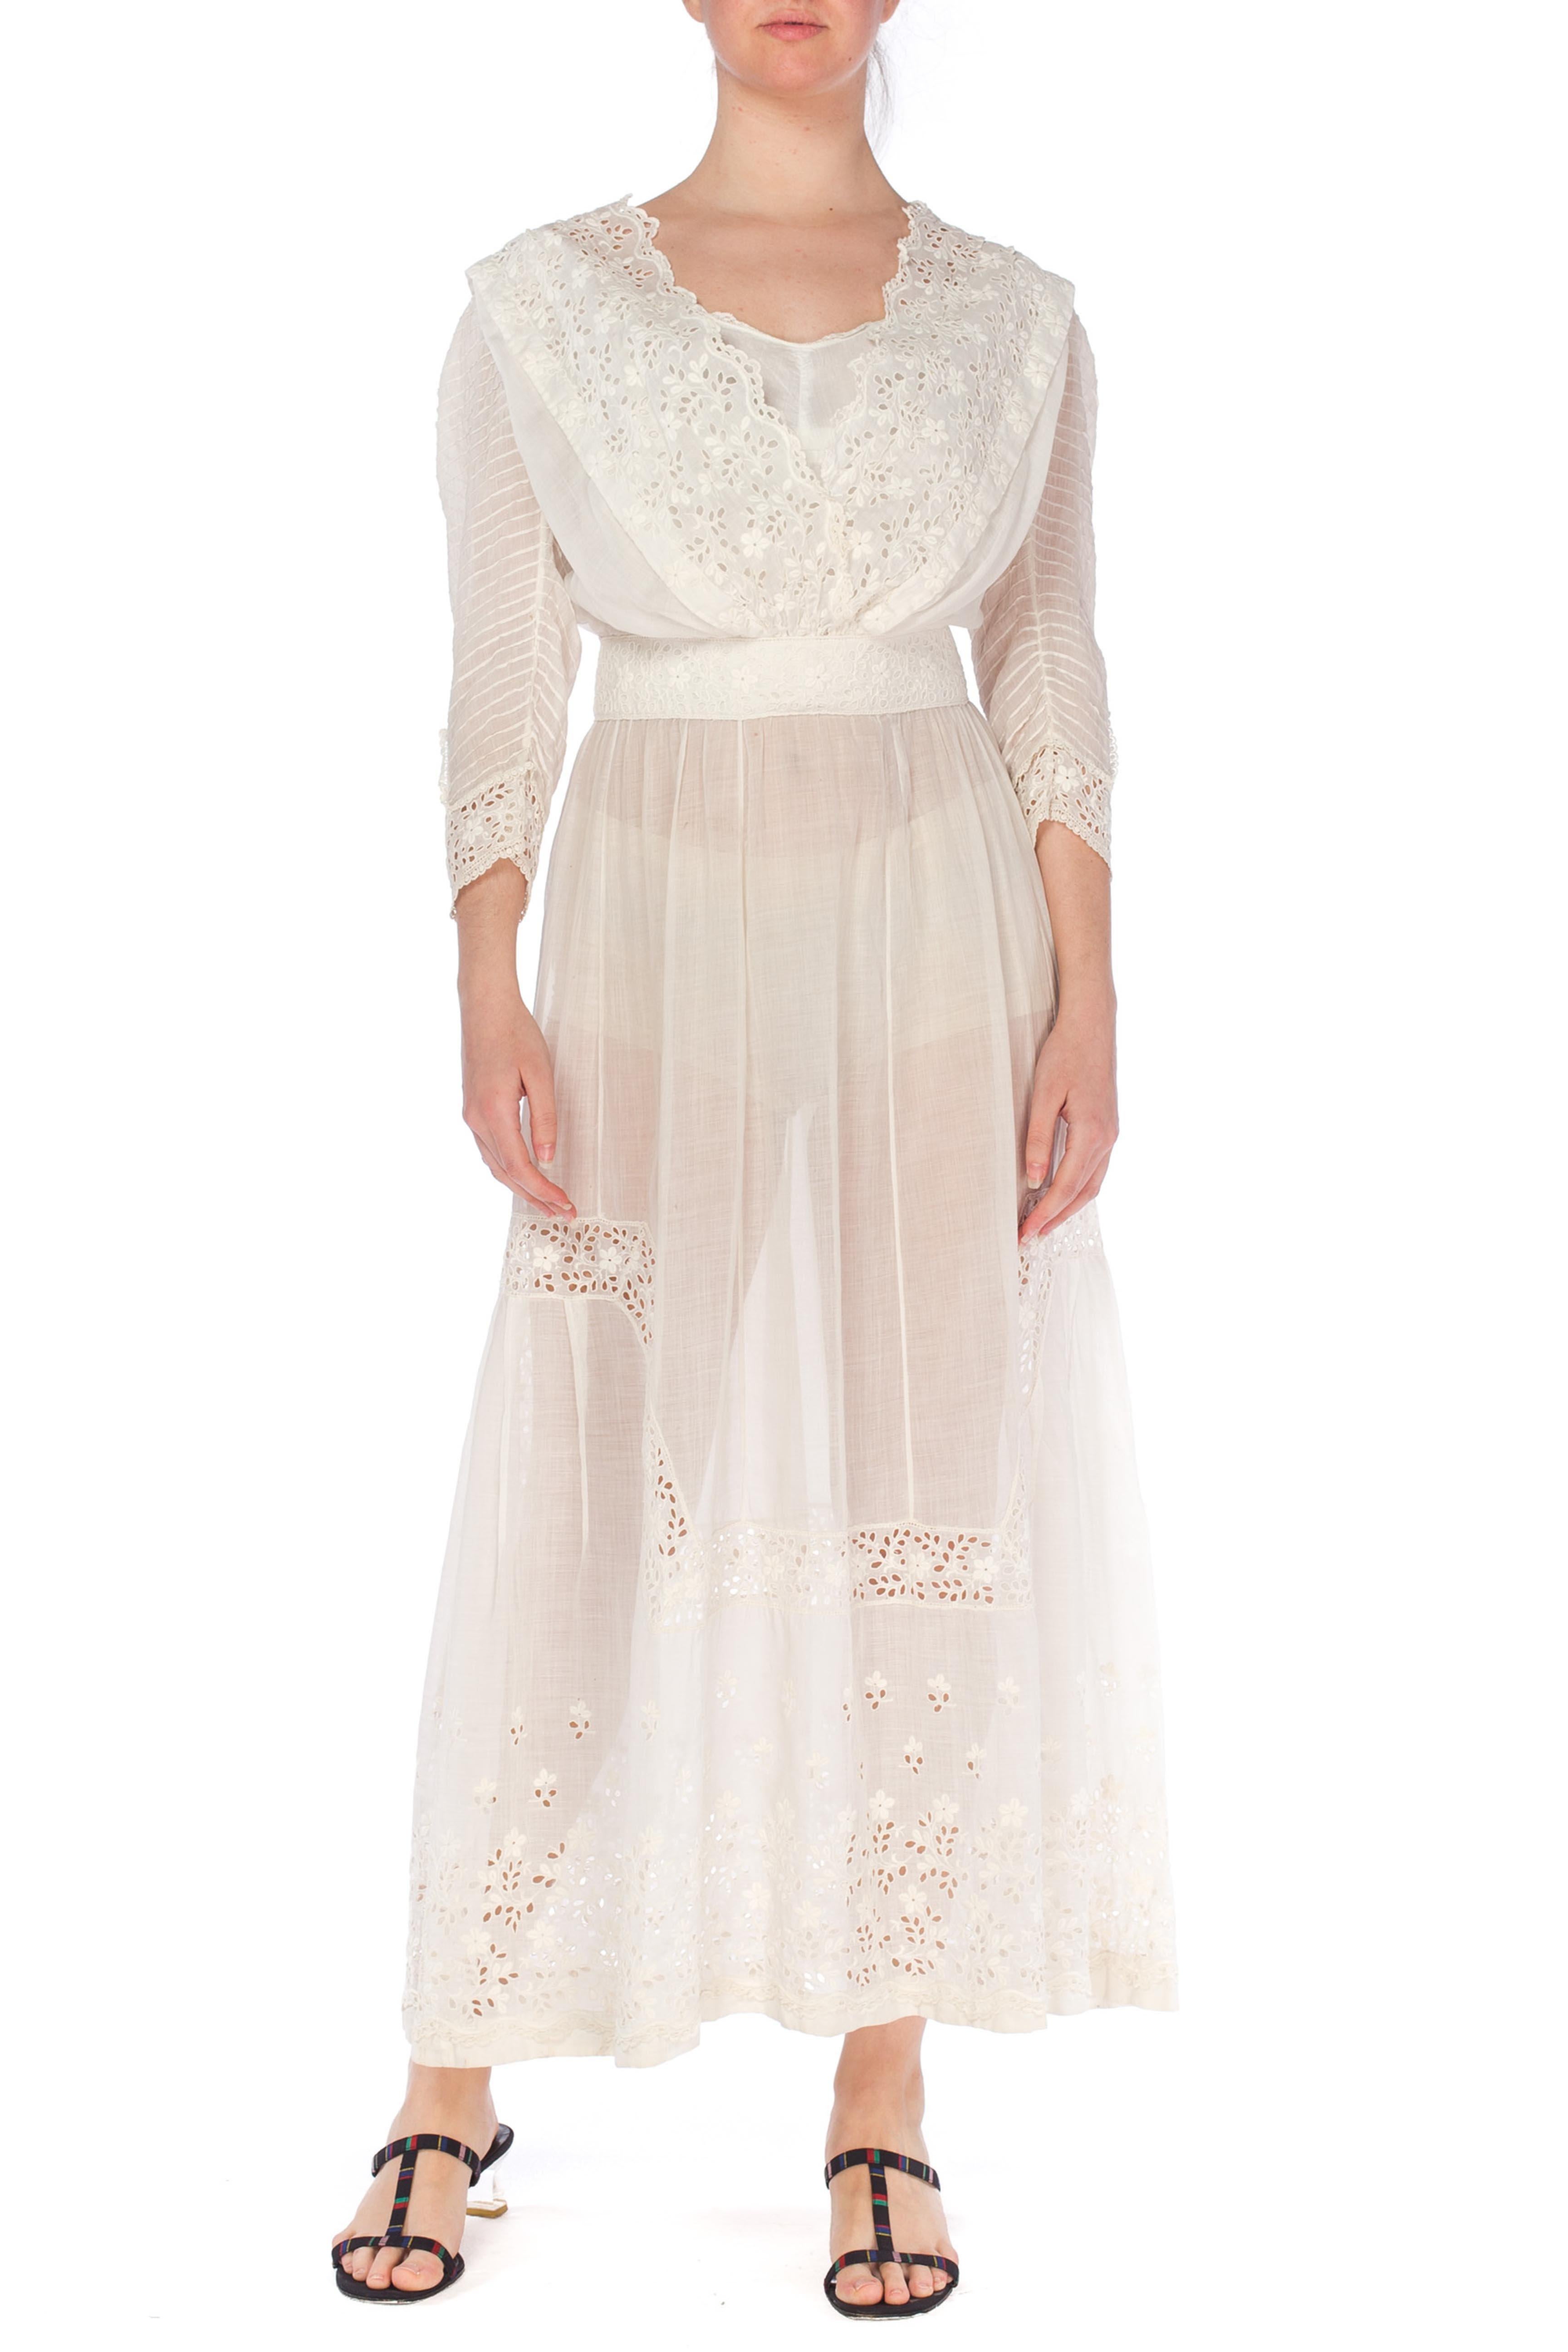 Women's 1900S White Cotton Lawn & Edwardian Eyelet Lace Dress With Pintucked Sleeves For Sale